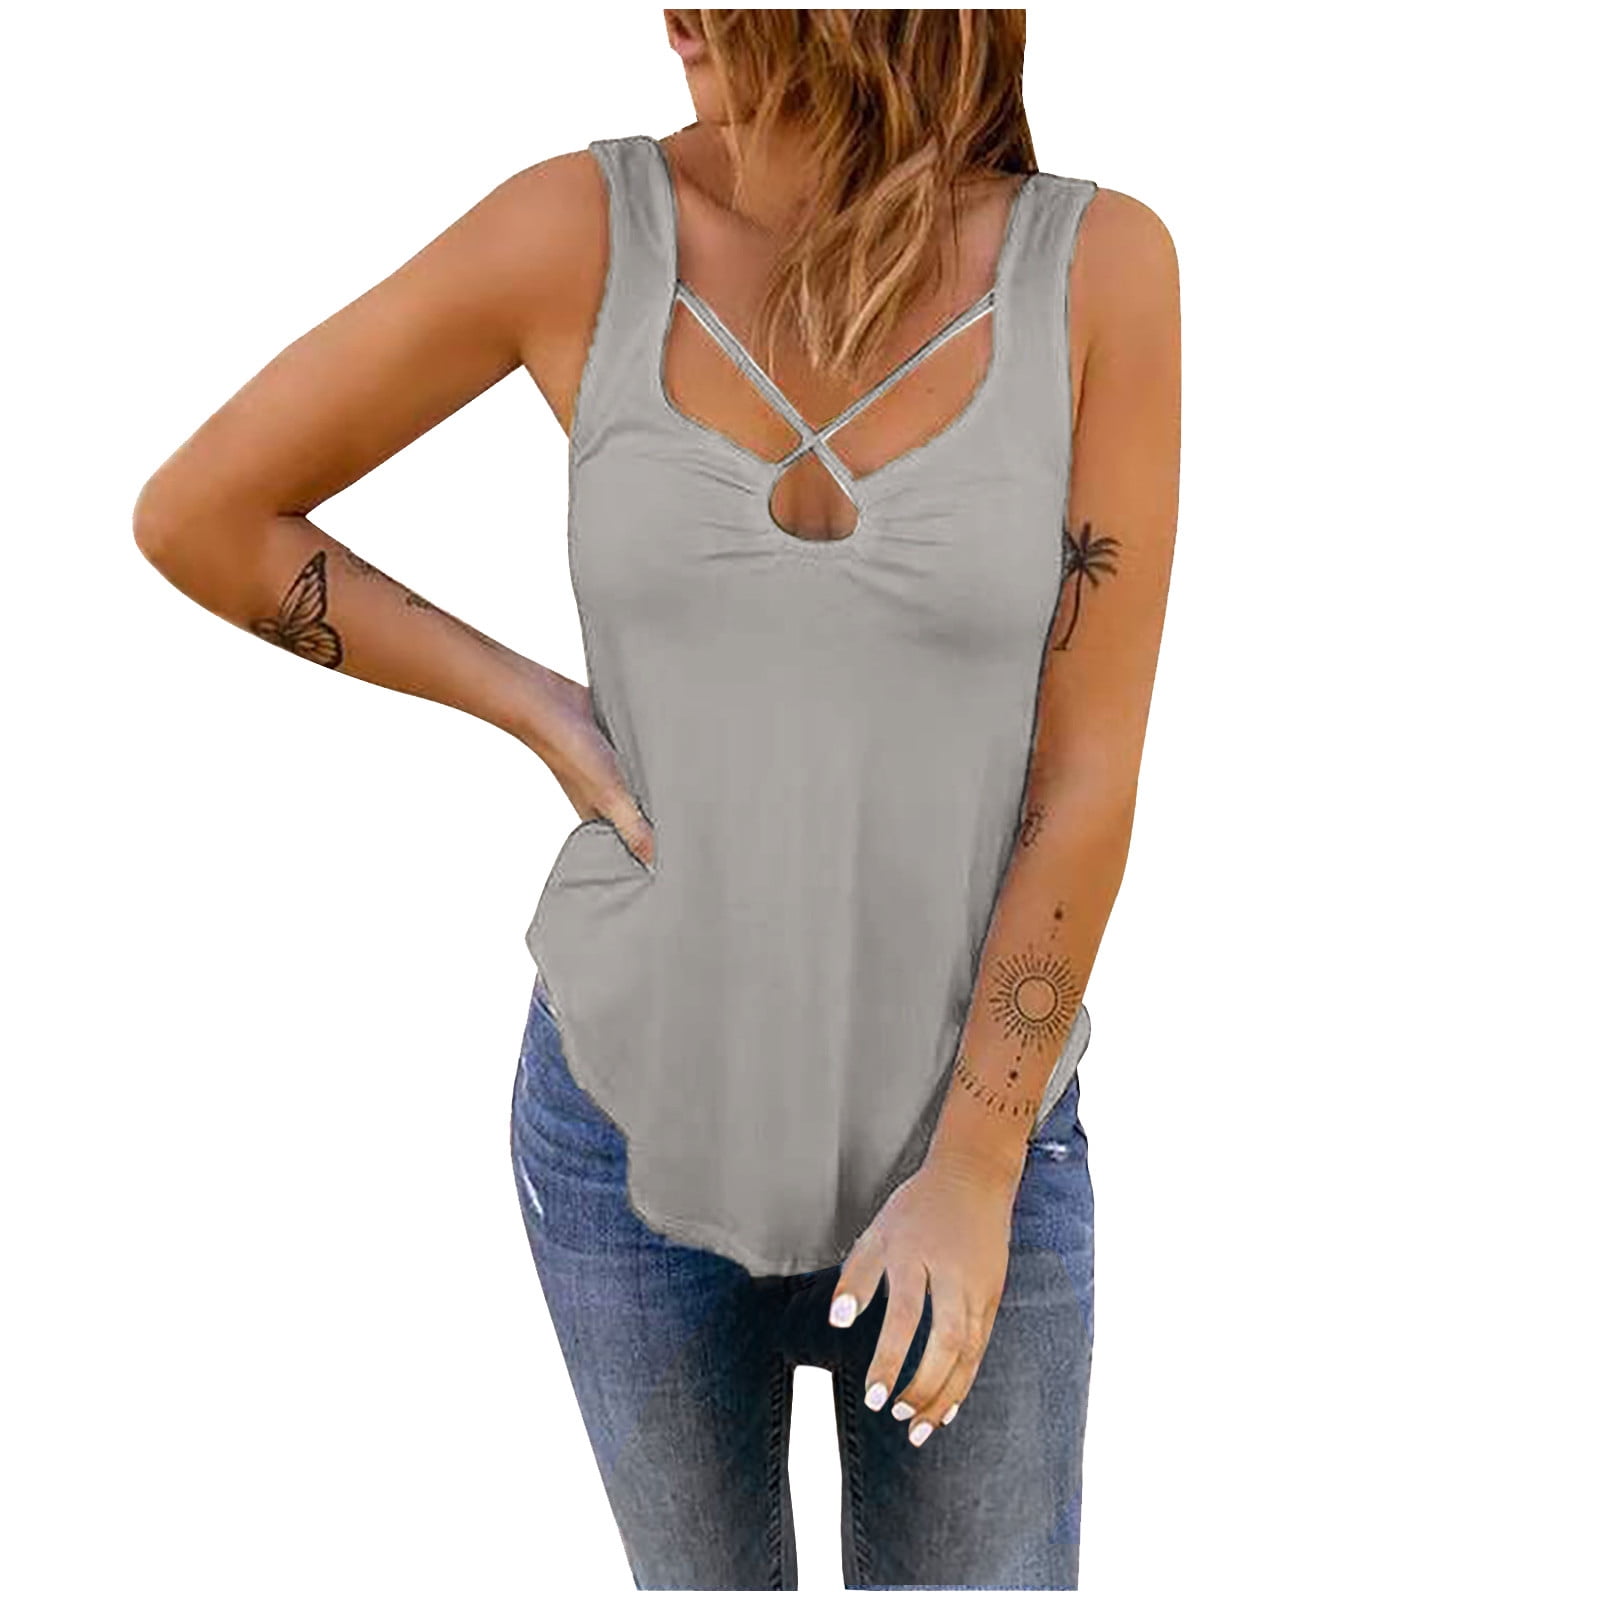 Jsezml Push up Tank Tops for Women Casual Sleeveless Hide Belly